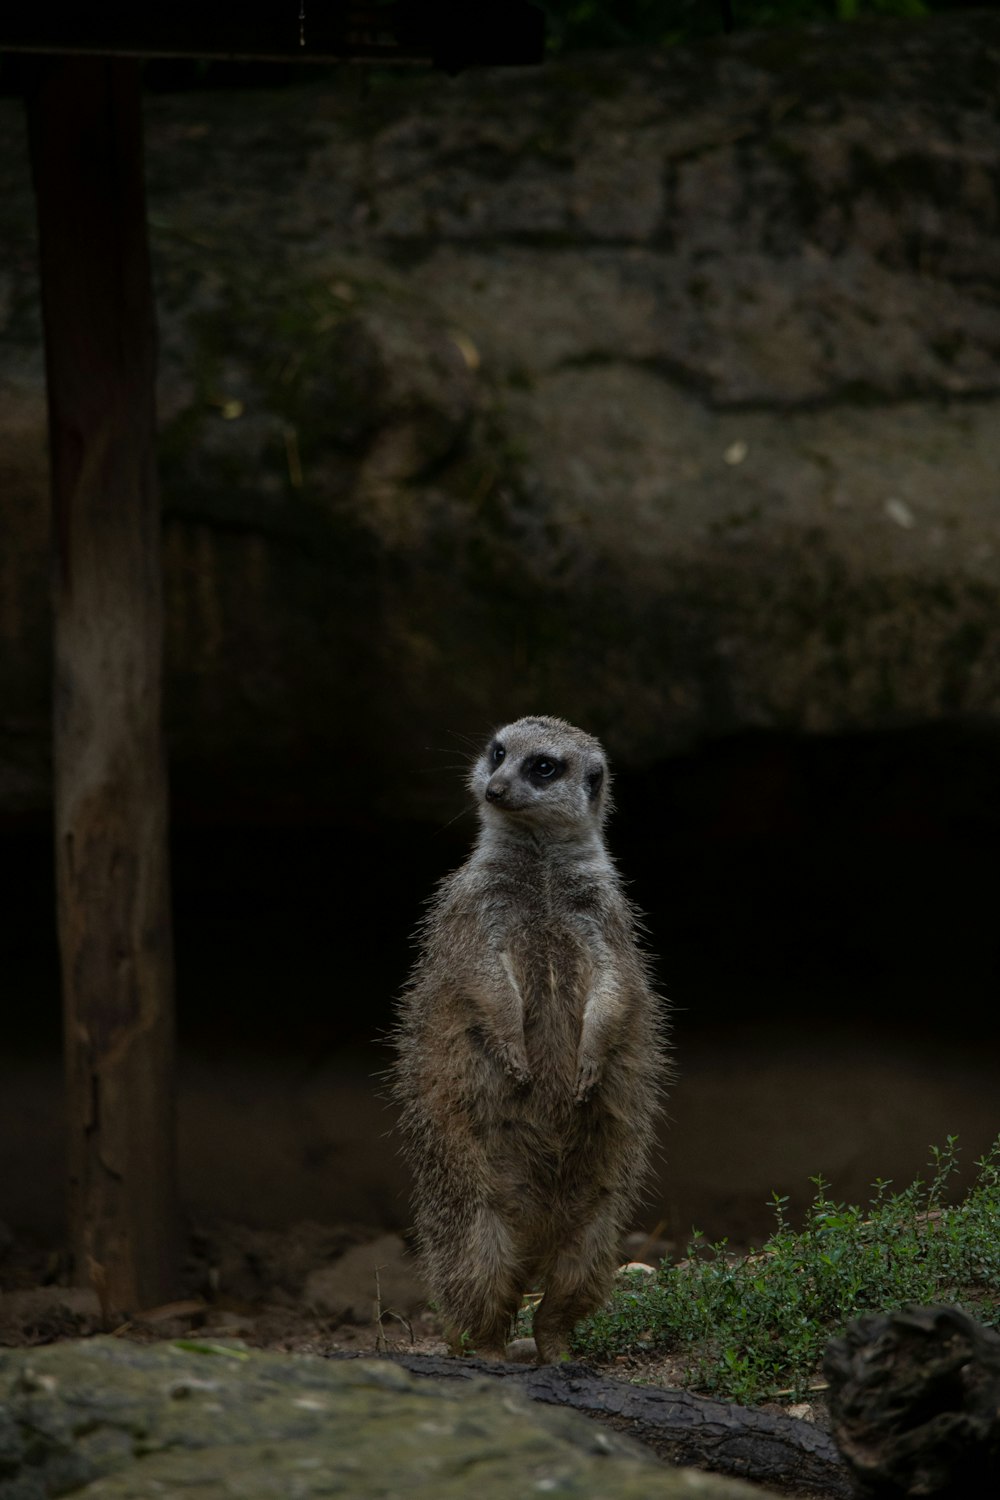 a meerkat standing on a rock in a zoo